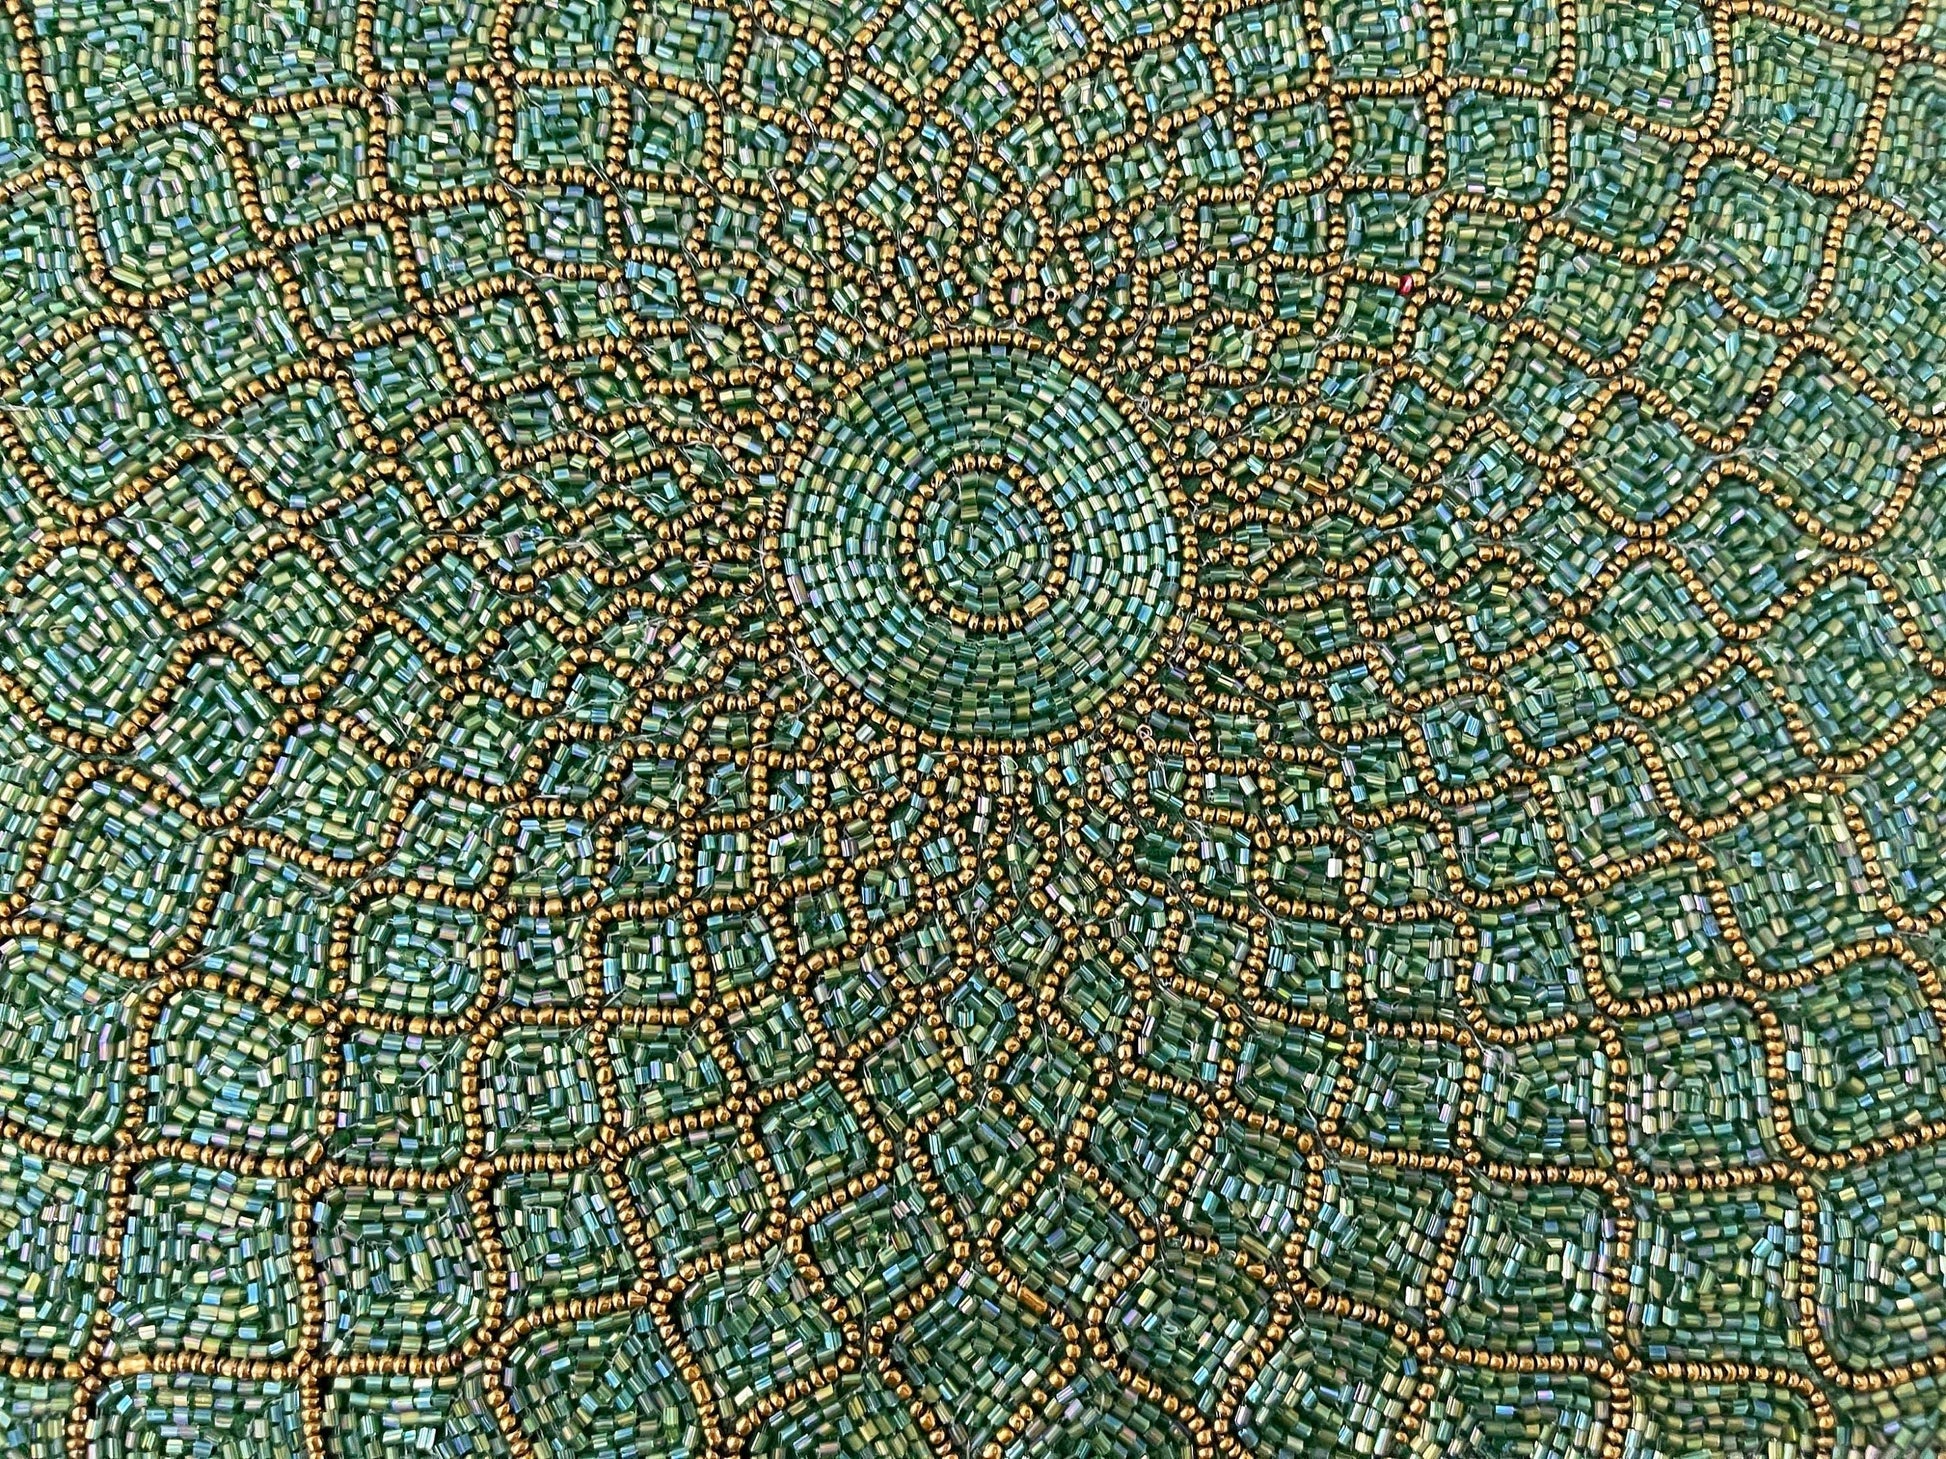 Moroccan Diamond Round Beaded Placemat - Green - MAIA HOMES